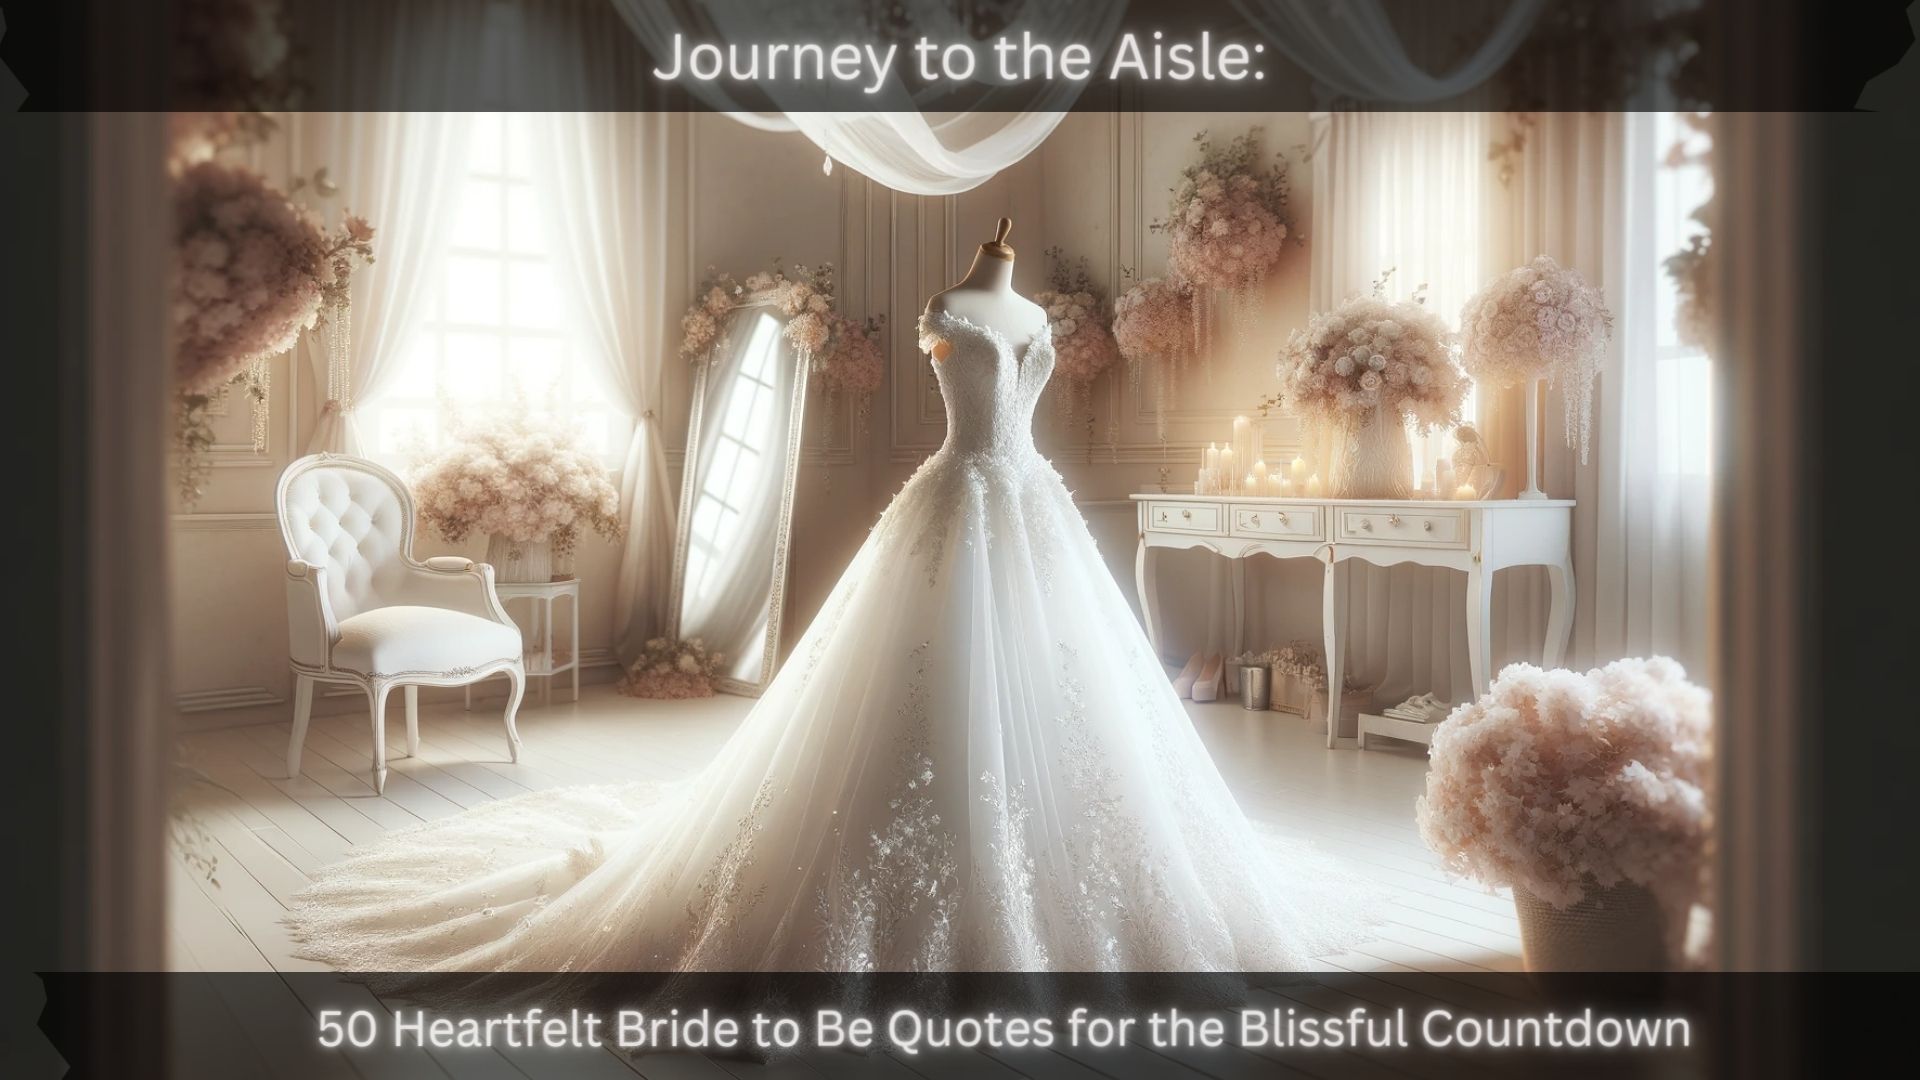 You are currently viewing Journey to the Aisle: 50 Heartfelt Bride to Be Quotes for the Blissful Countdown